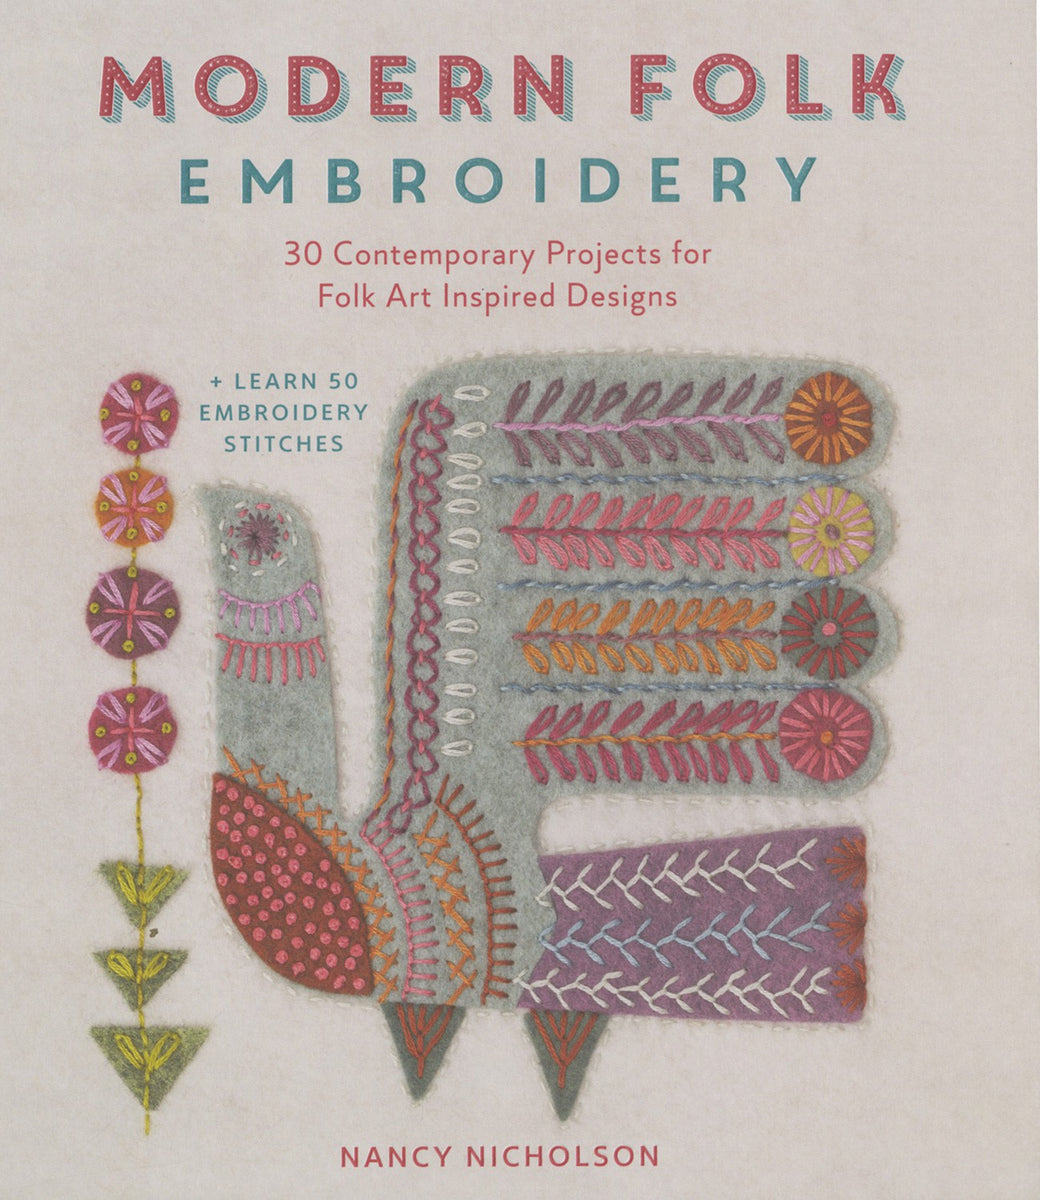 Modern Folk Embroidery Quilting Pattern – Quilting Books Patterns and  Notions